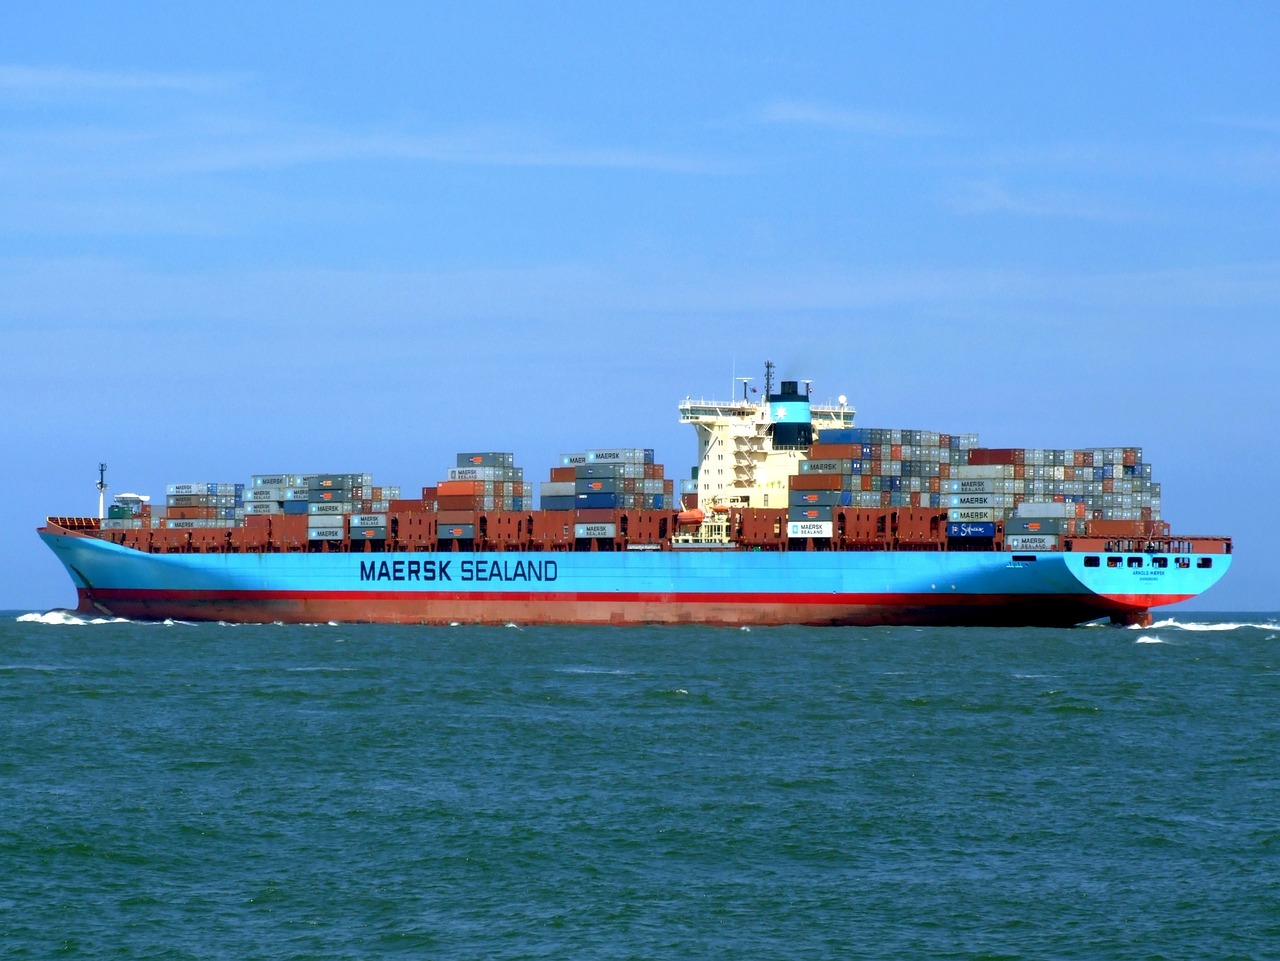 Supply and demand imbalance in shipping market, Maersk plans to lay off 10,000 people